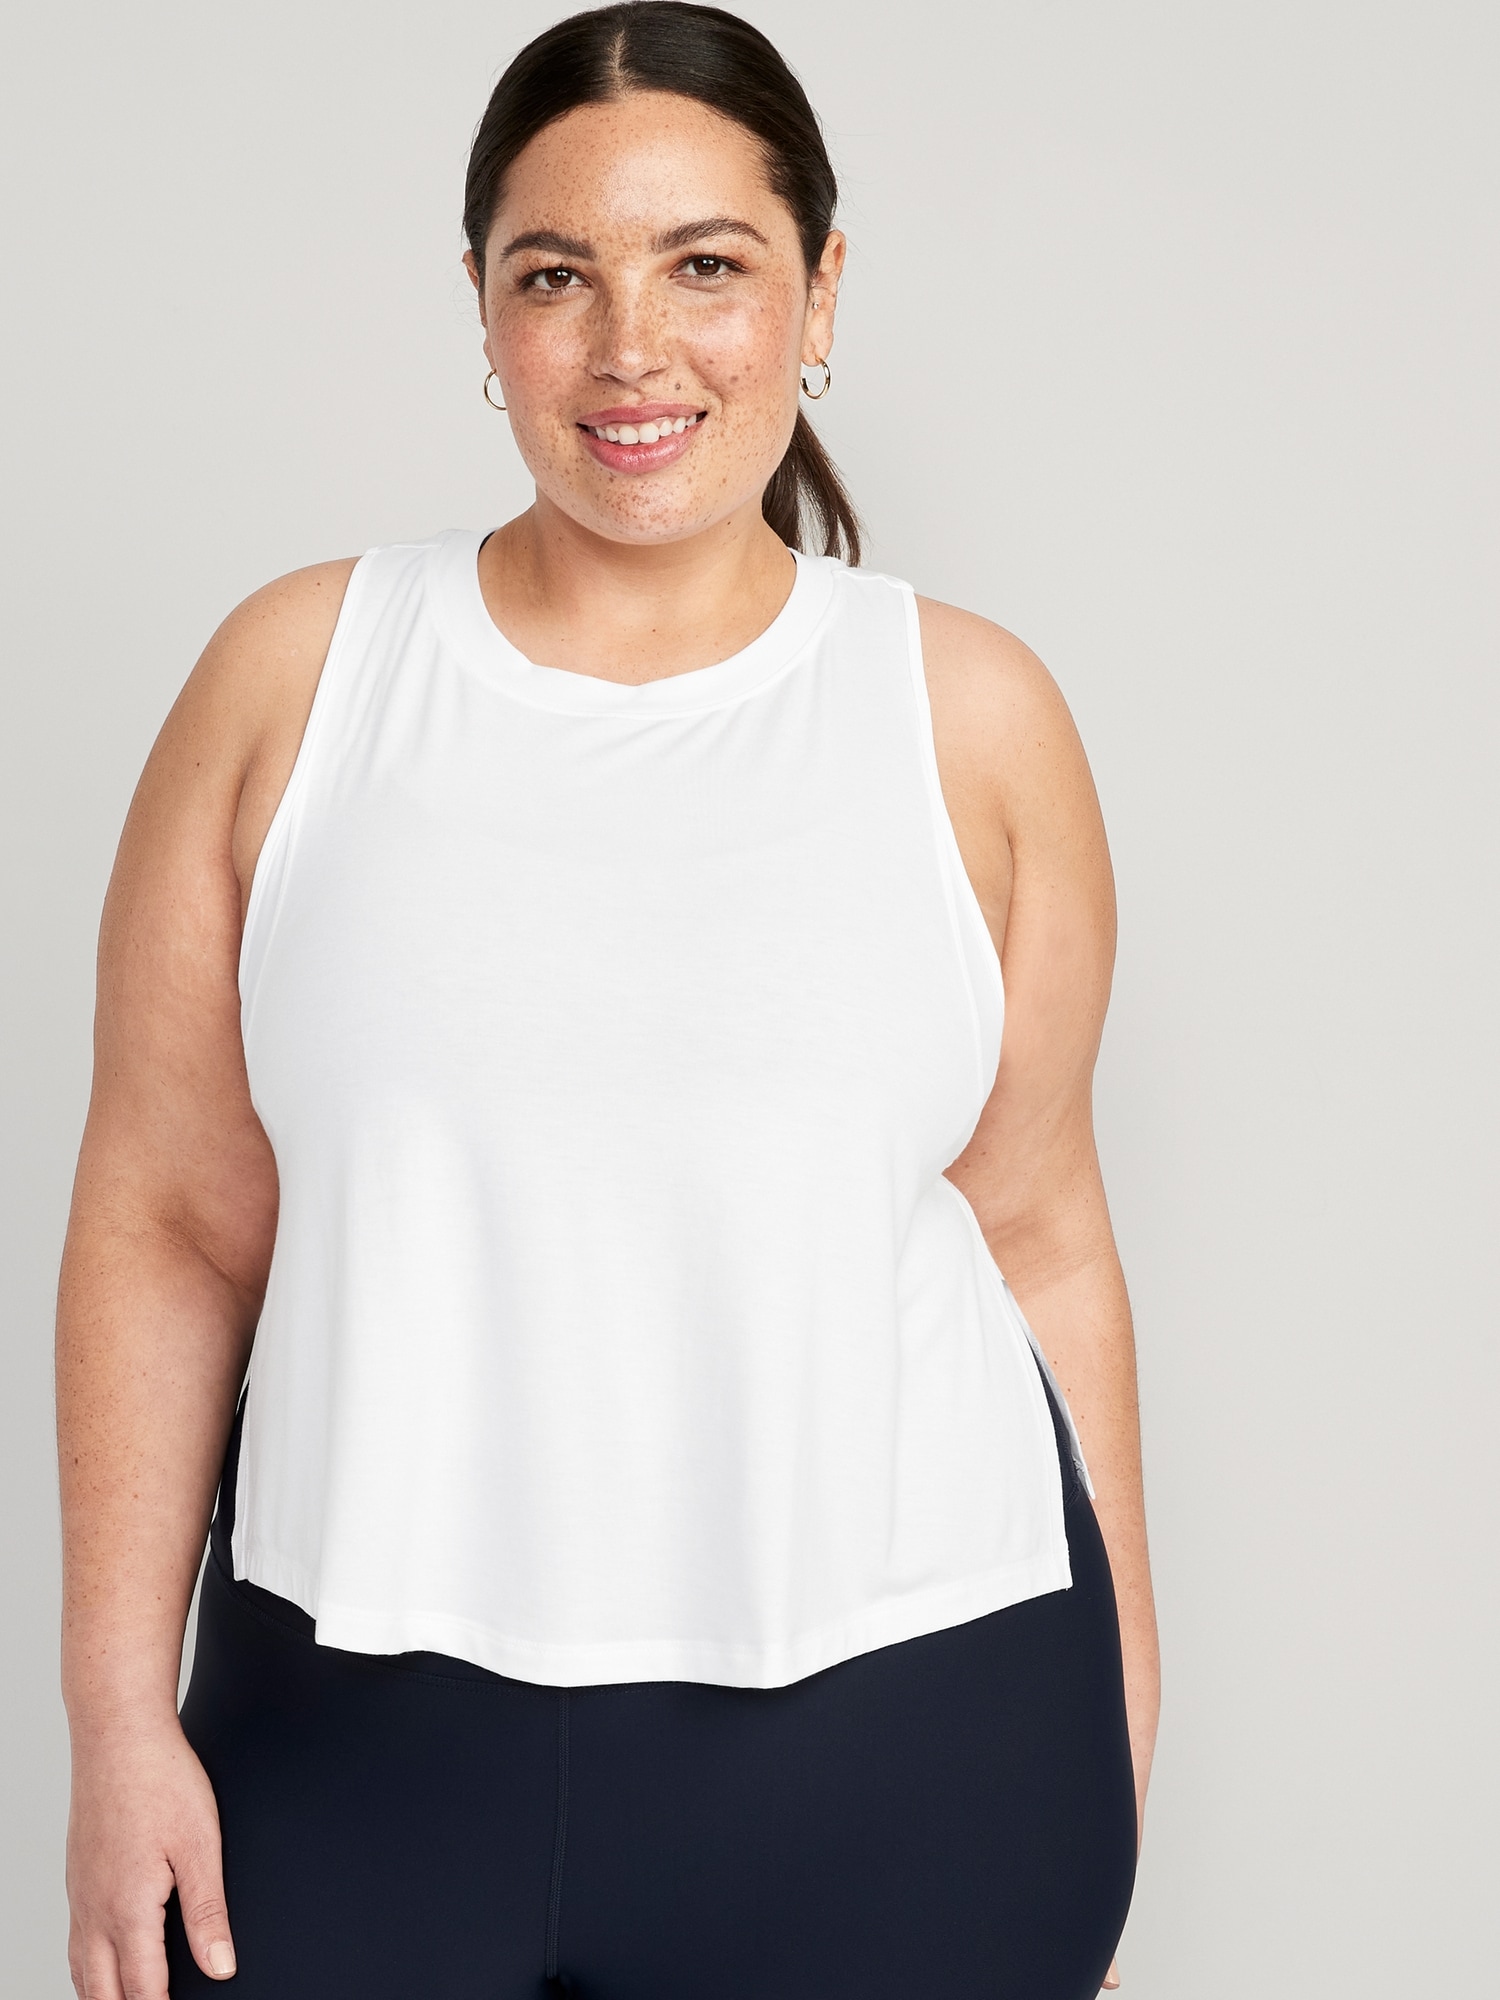 UltraLite All-Day Sleeveless Cropped Top for Women | Old Navy